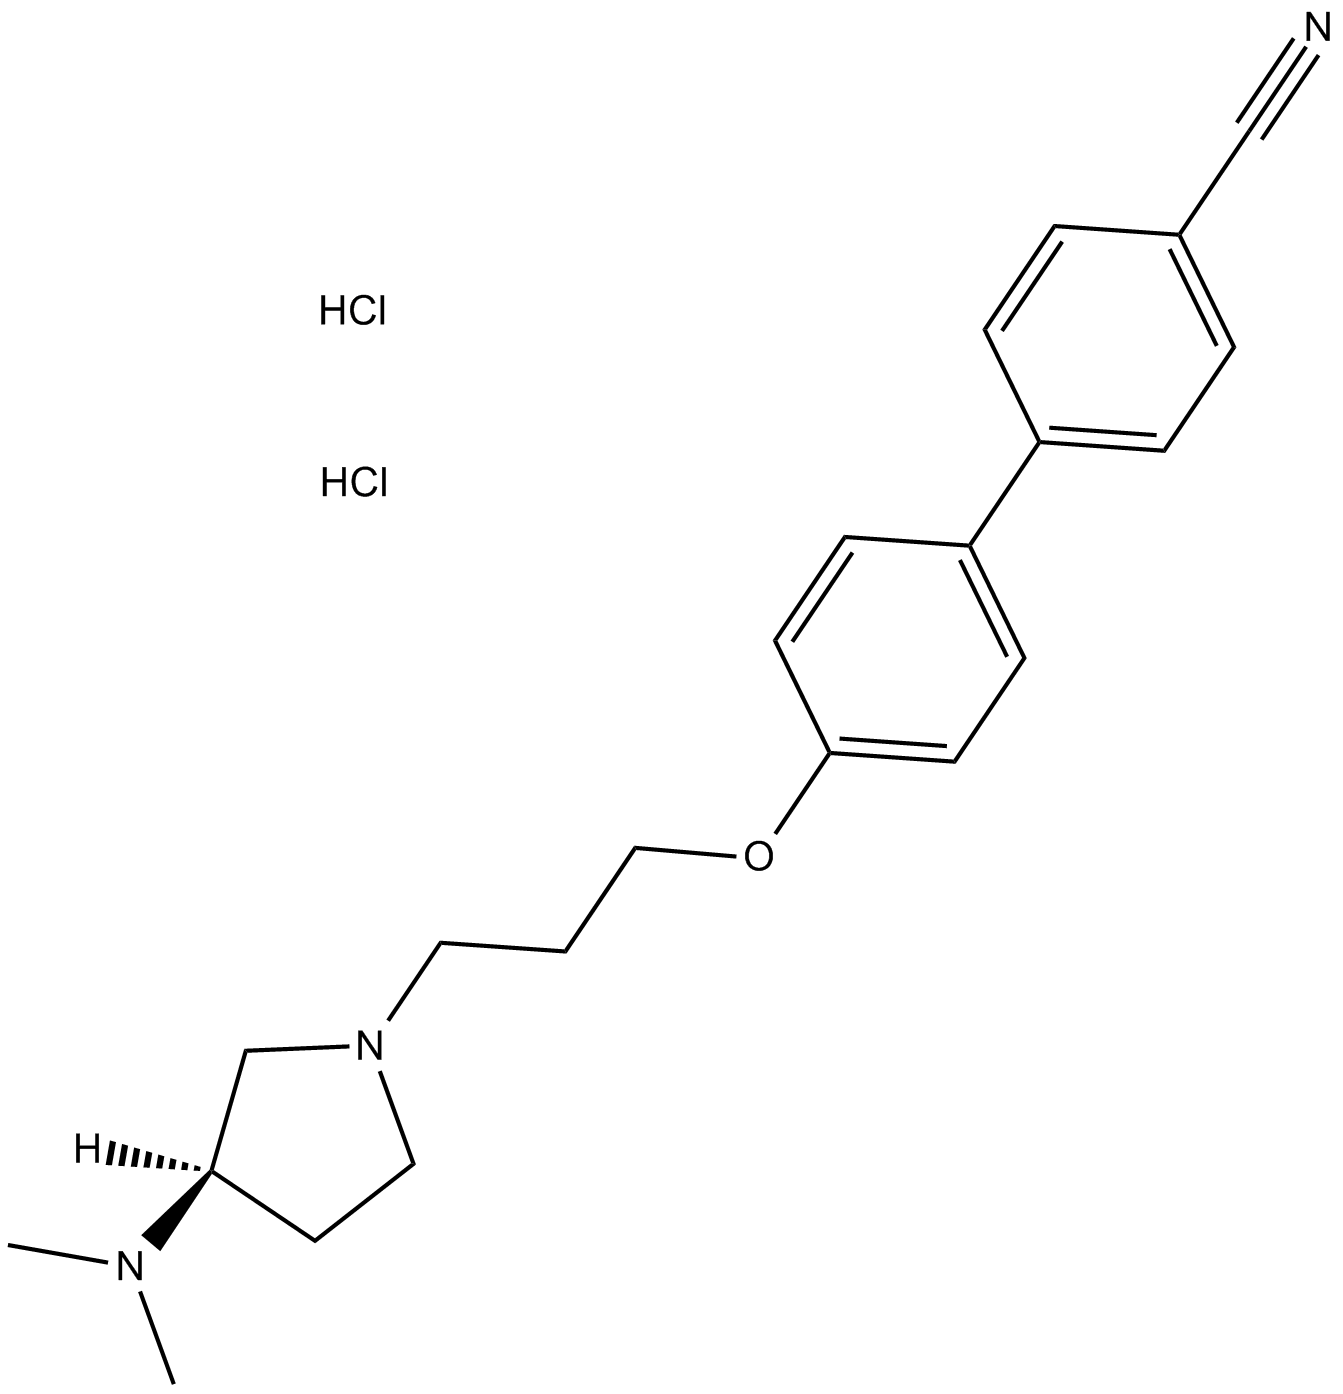 A 331440 dihydrochloride  Chemical Structure